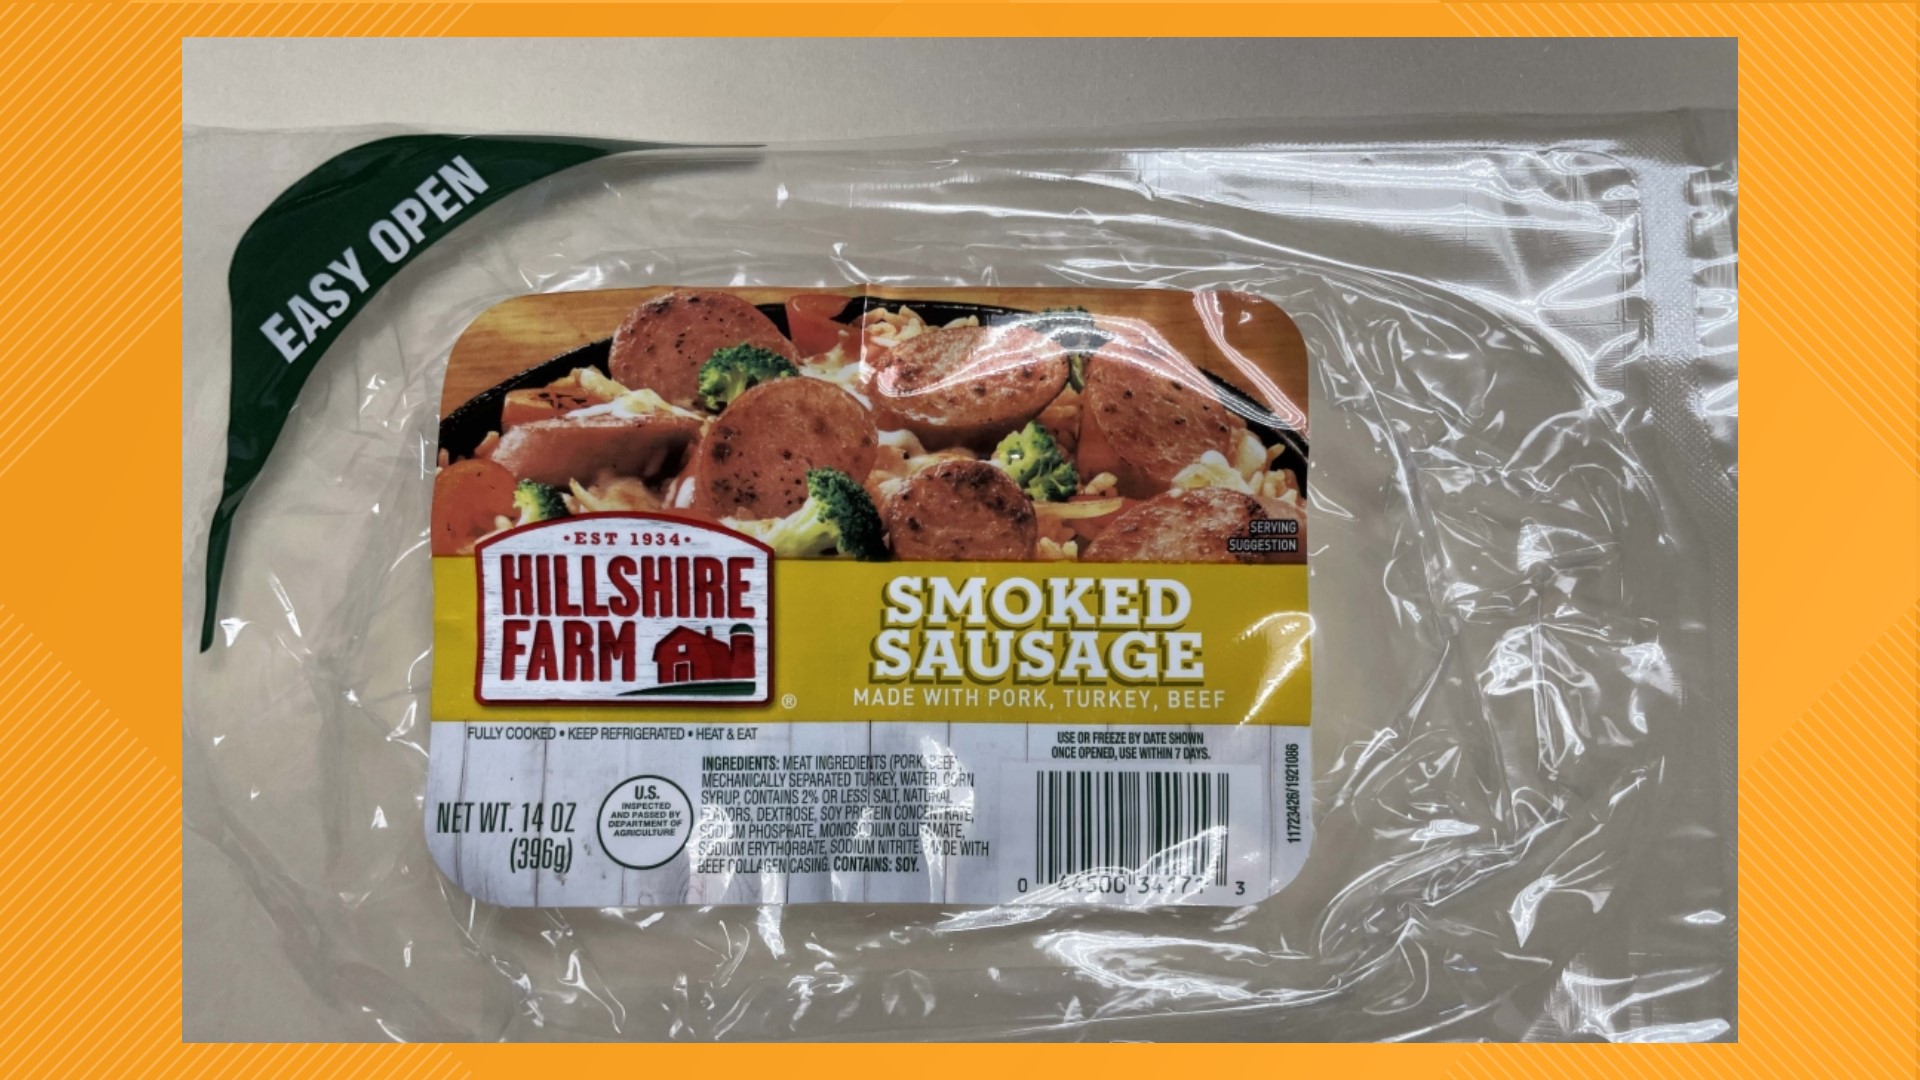 Hillshire Brands Company announced that approximately 15,876 pounds of smoked sausage products will be recalled due to a potential bone fragment contamination.